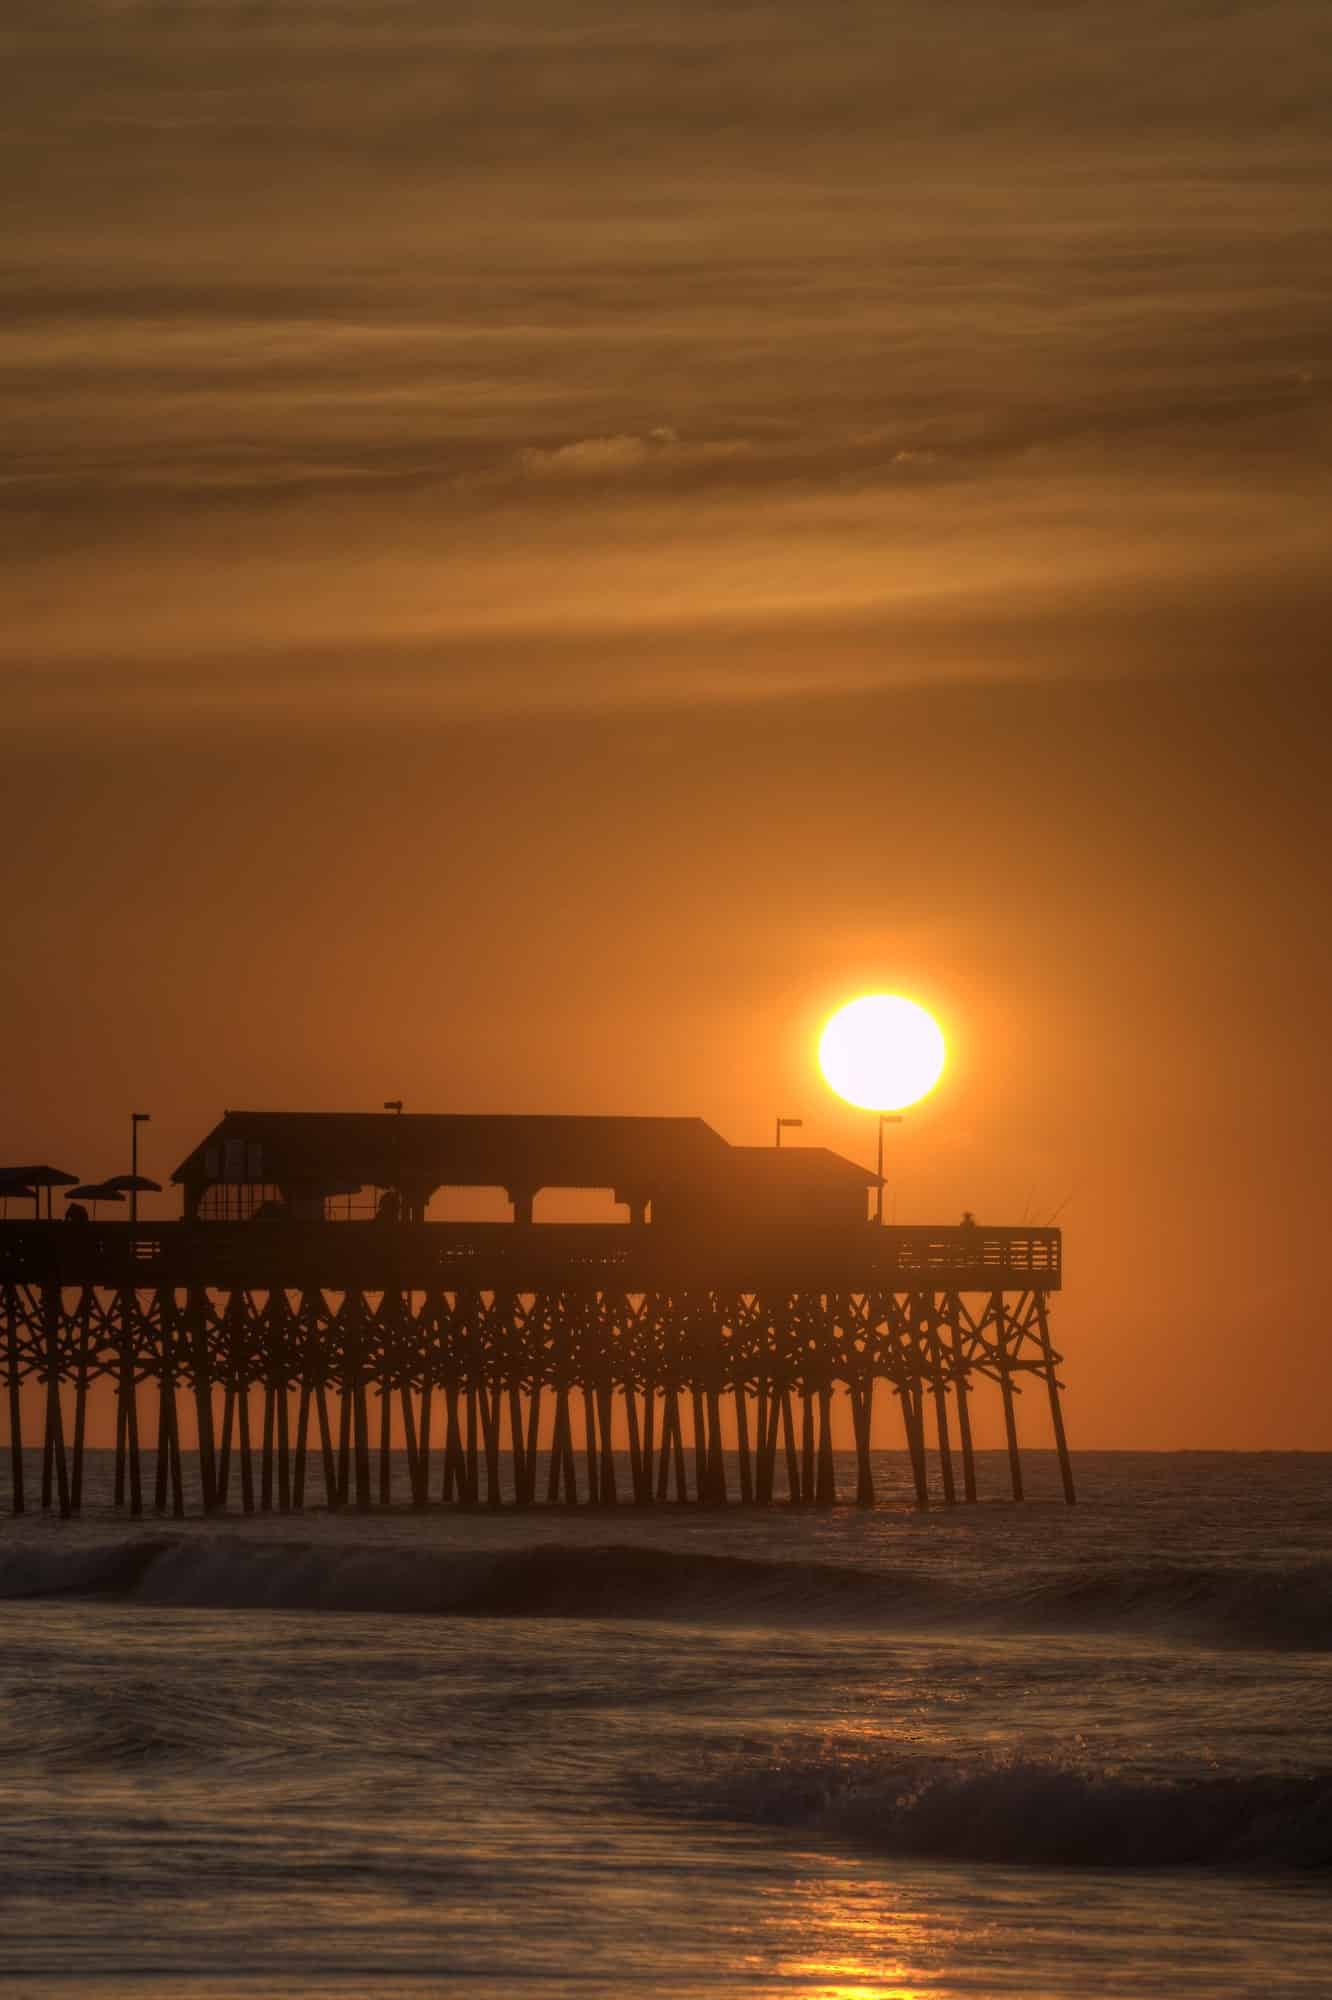 A warm orange sunrise over the black silhouetted Pier at Garden City Beach in South Carolina.